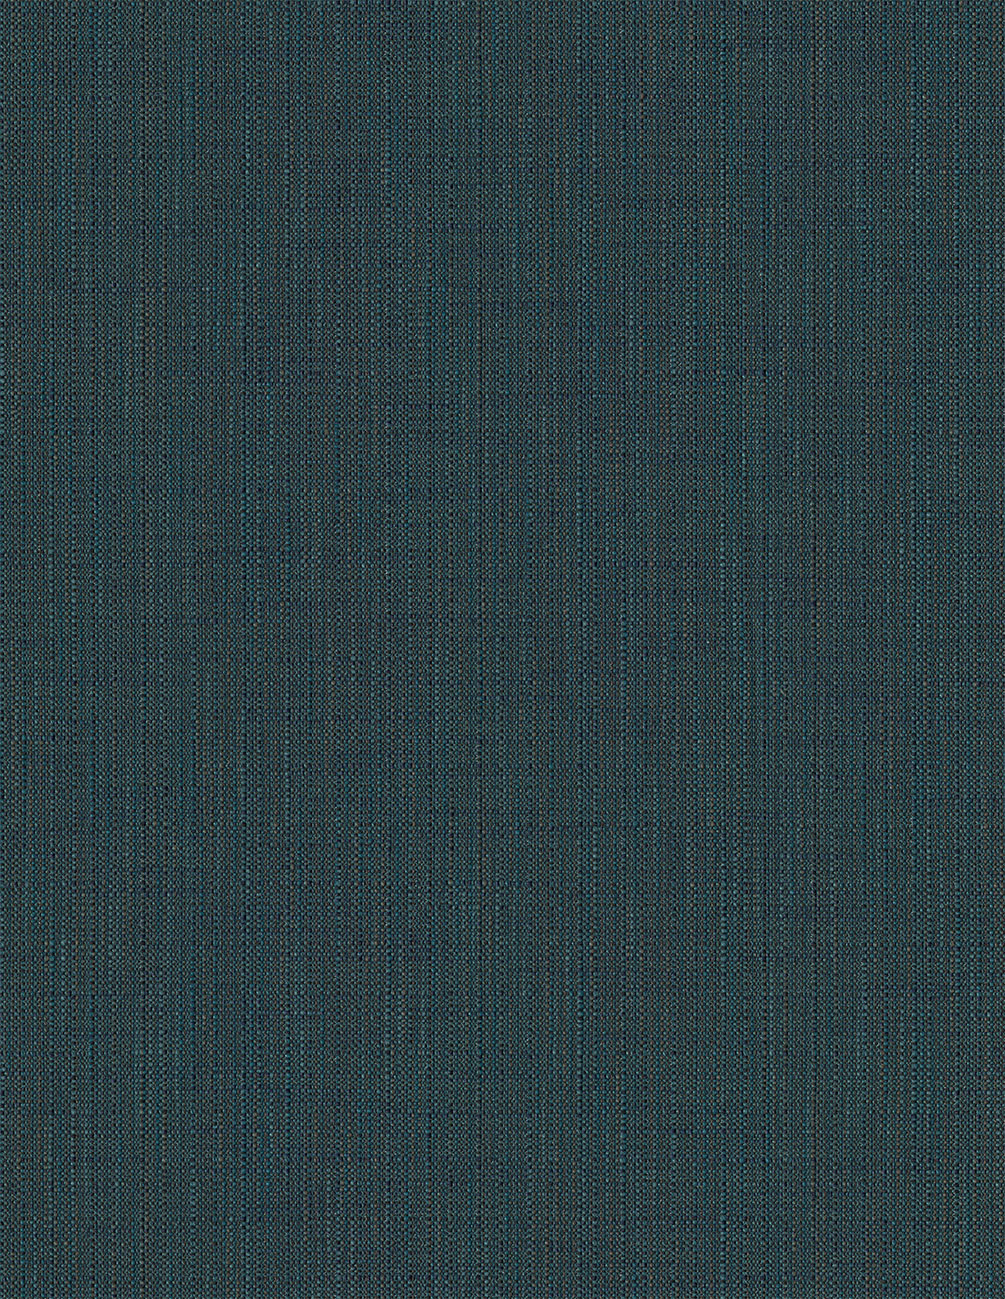 Particulate - Oxidation - 4109 - 09 Tileable Swatches